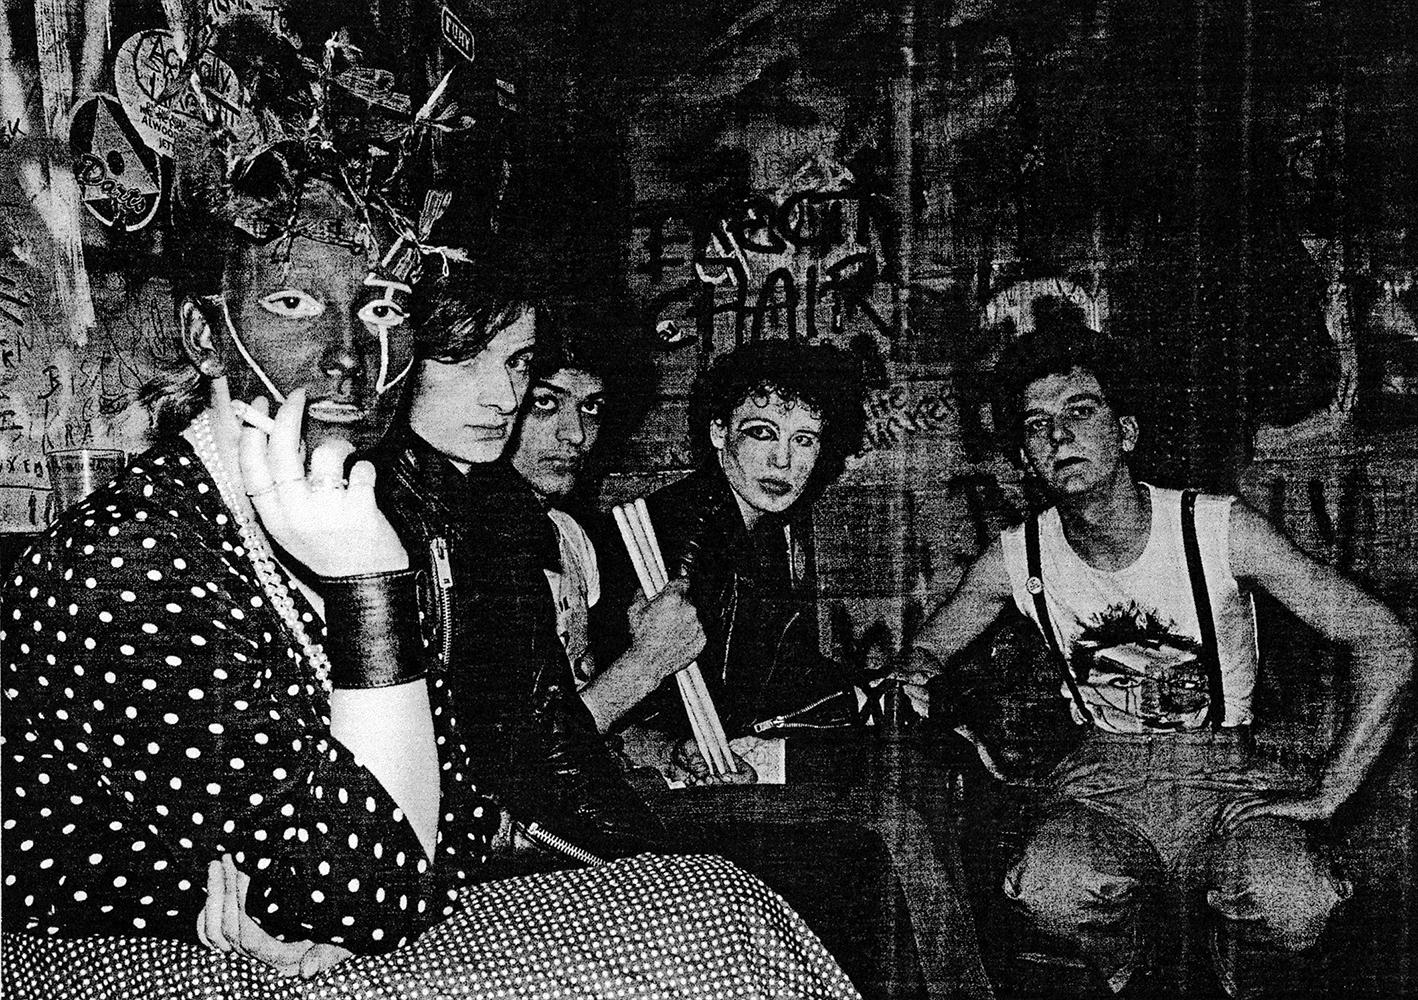 Jordan and Adam and the Ants, Marquee, London, 1977.